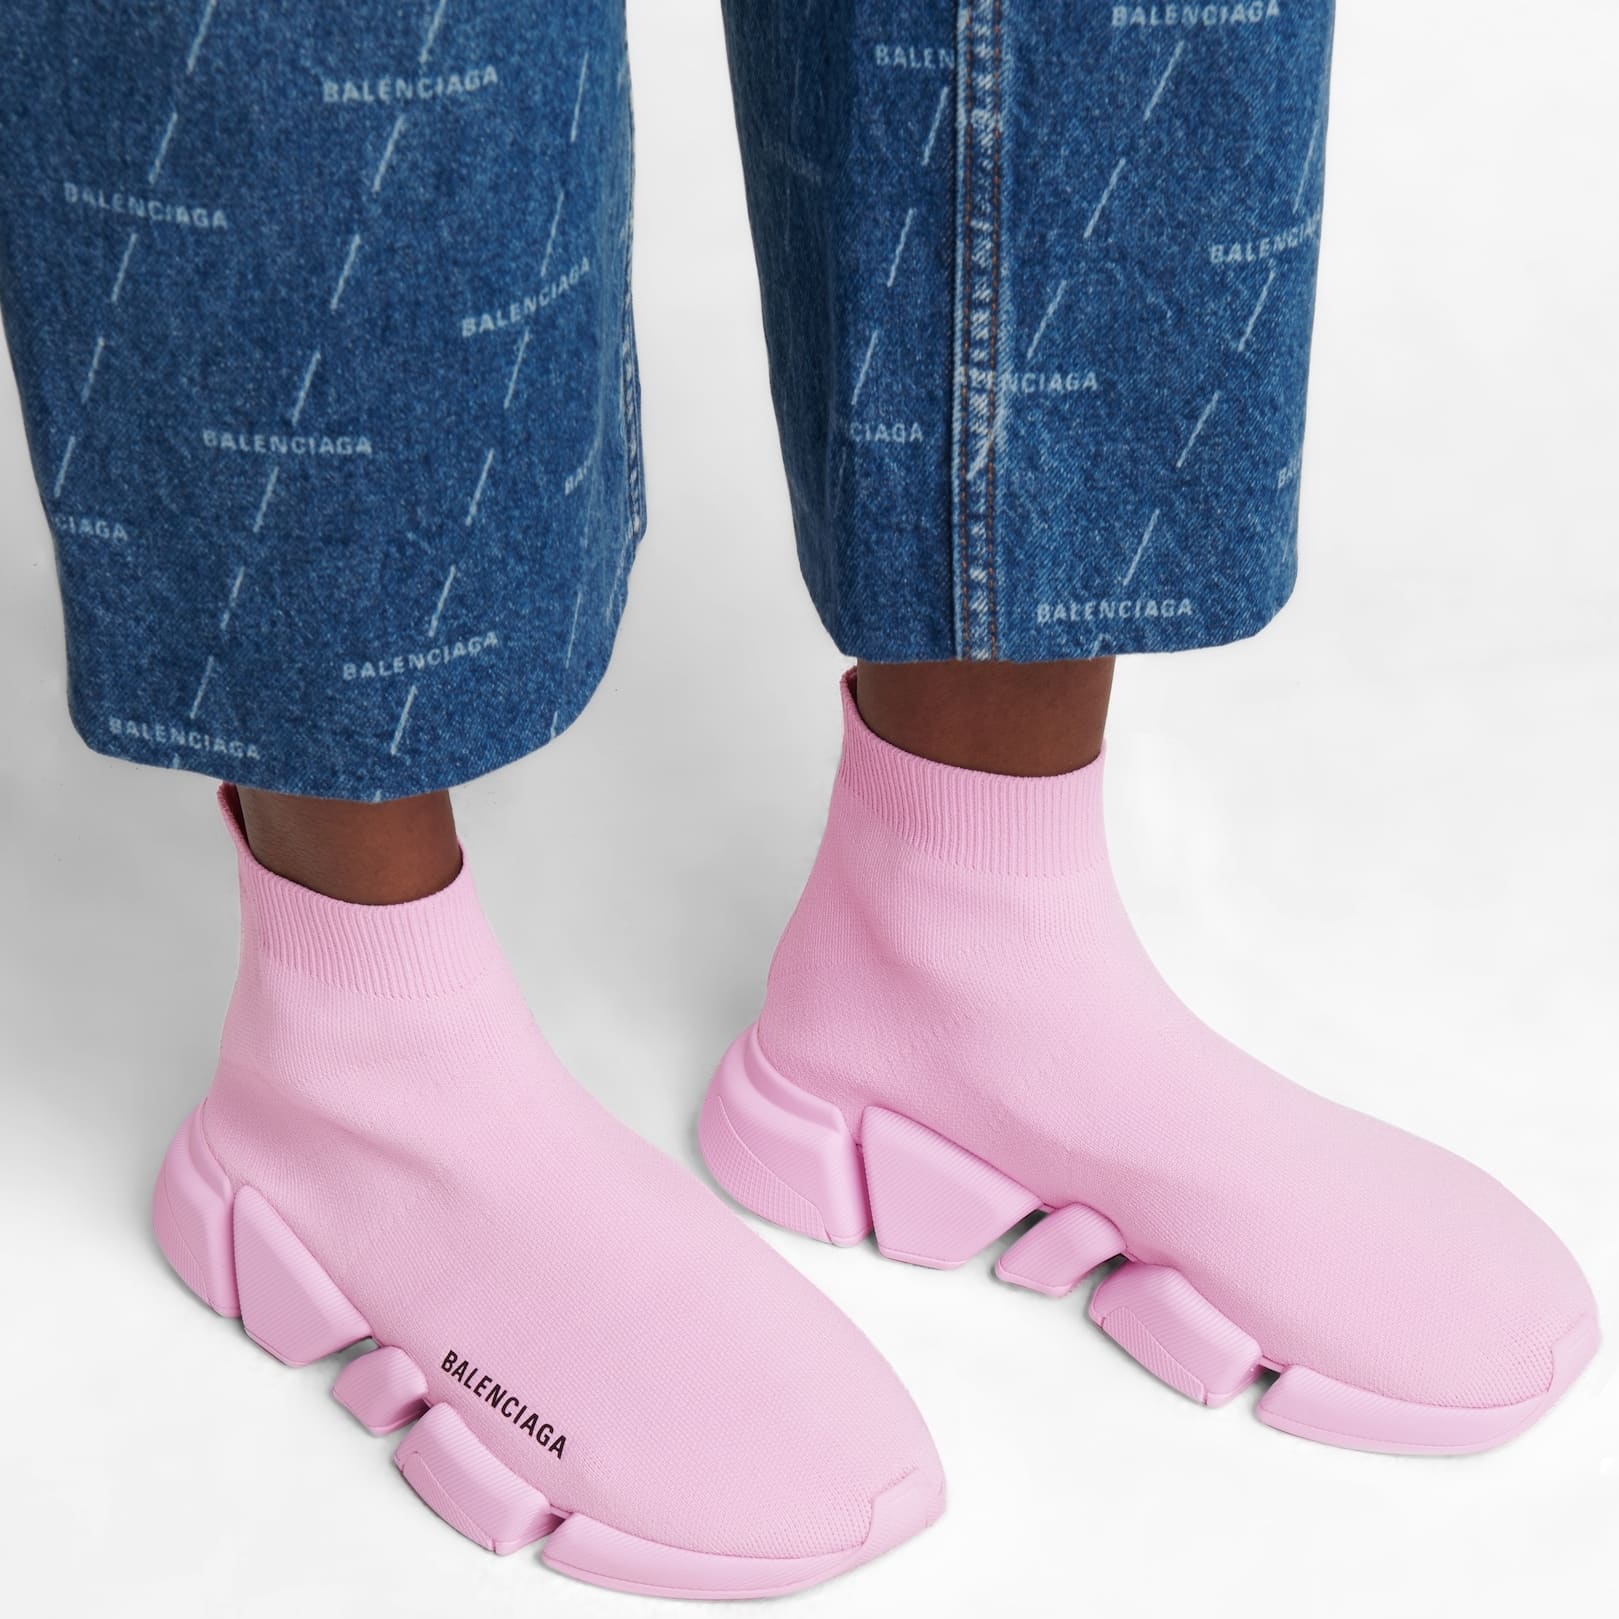 These pink Balenciaga lightweight Speed 2.0 sneakers feature sock-like knit uppers and textured rubber outsole with memory sole and shock absorption technology